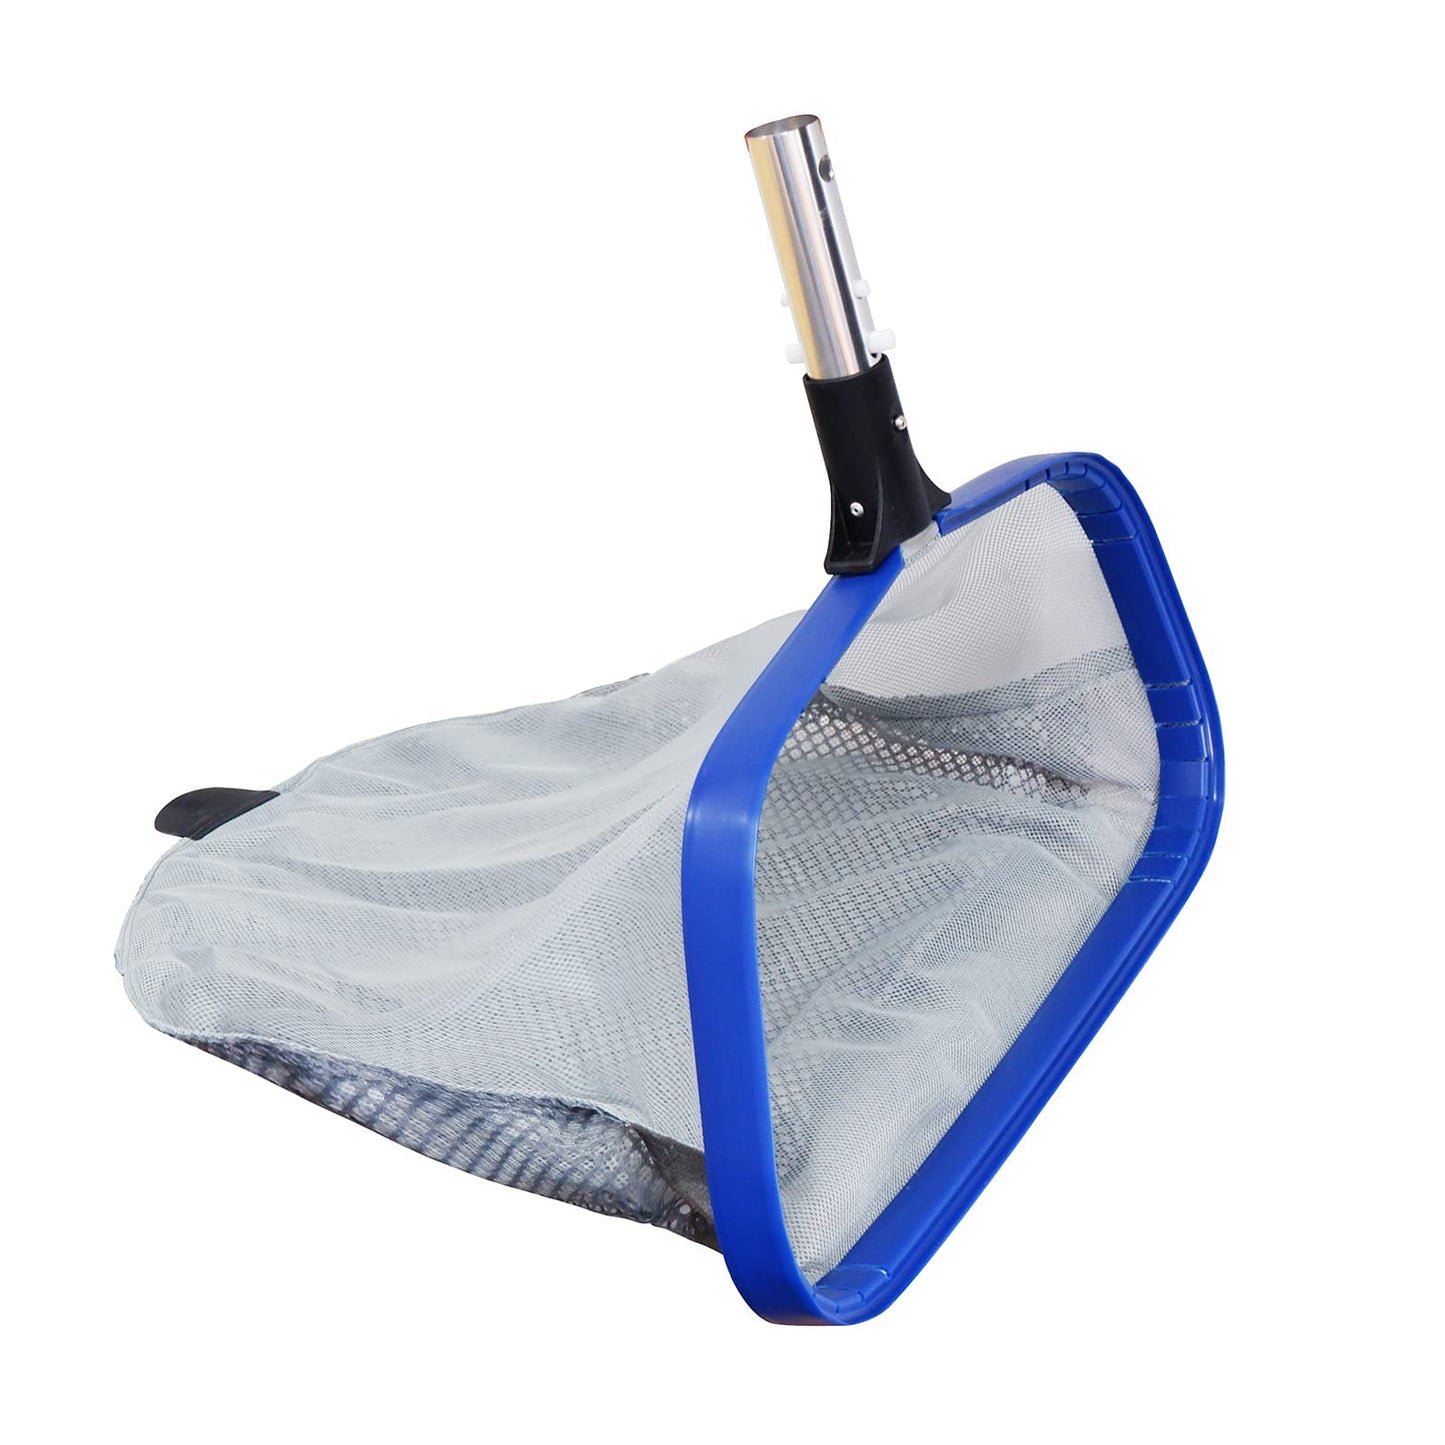 POOLWHALE Pool Leaf Rake with Double Layer Deep-Bag, Professional Skimmer Heavy Duty Mesh Net, Commercial Size(Plastic Tab at The Bottom for Assisting When You Empty The Net) Pool Rake